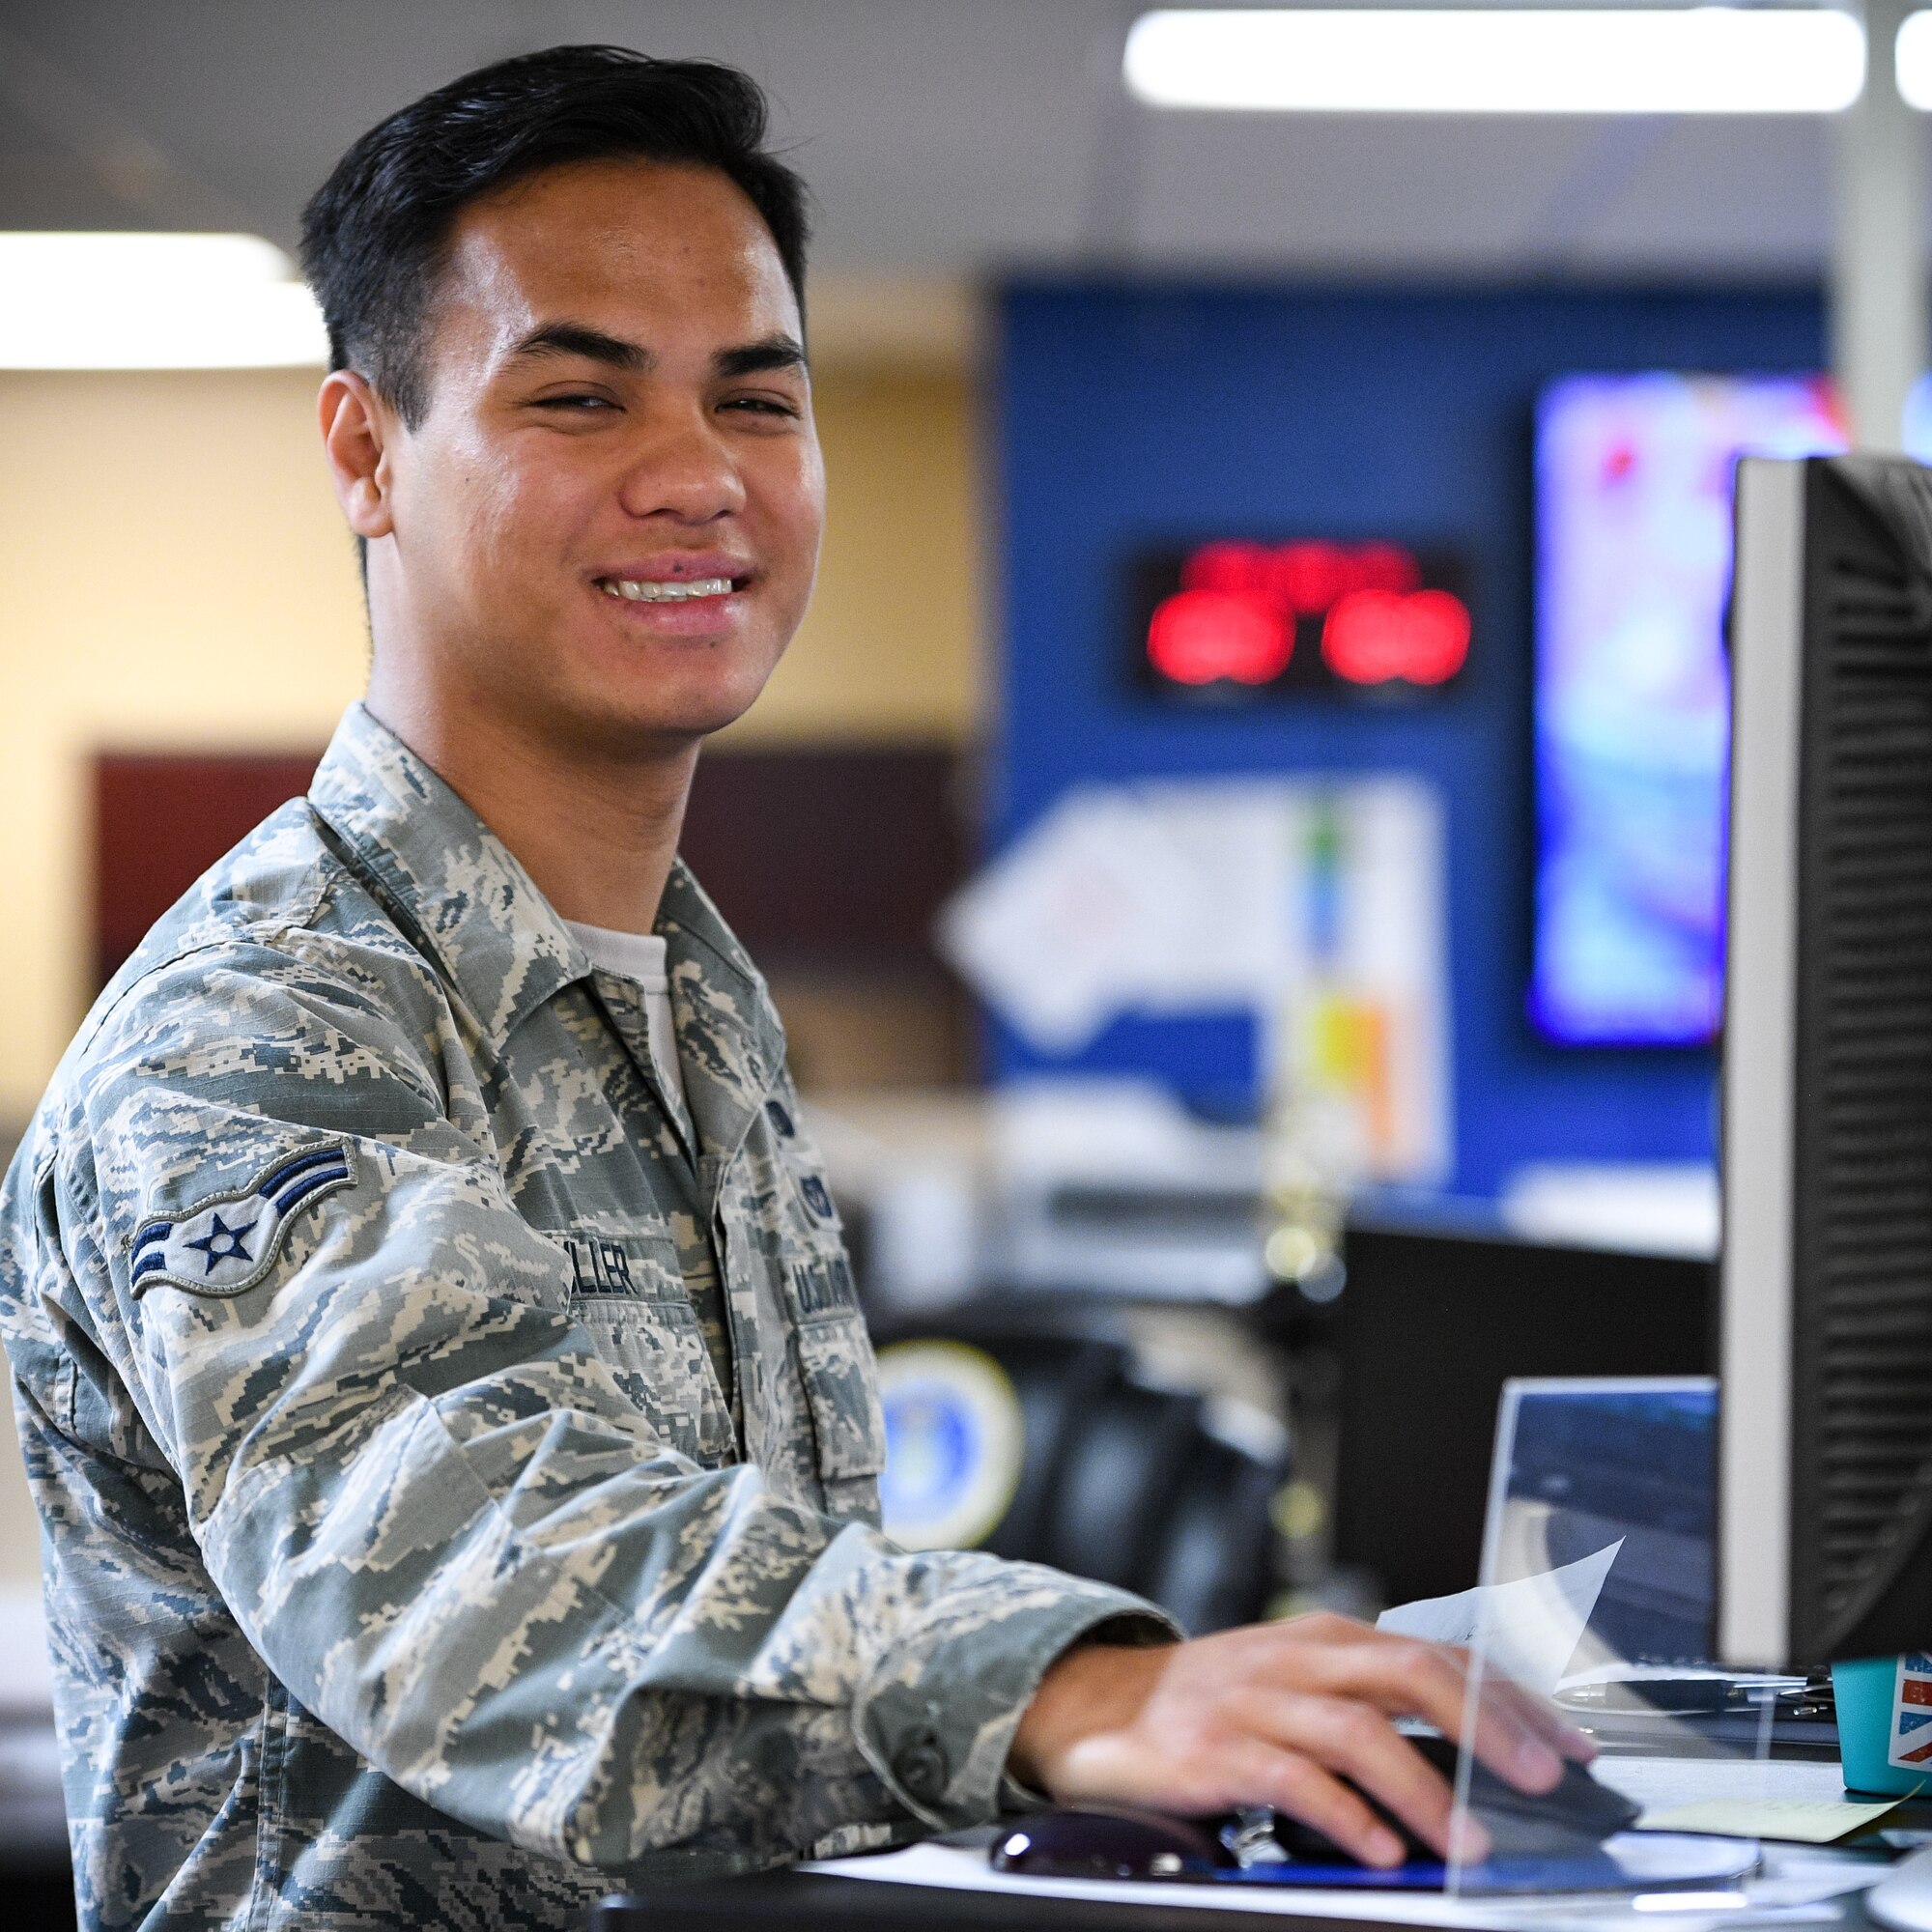 Airman 1st Class Vincent Duller poses for a photo April 30, 2018, at his work station at Hill Air Force Base, Utah. He was voted a Top 3 Superior Performer. (U.S. Air Force photo by R. Nial Bradshaw)